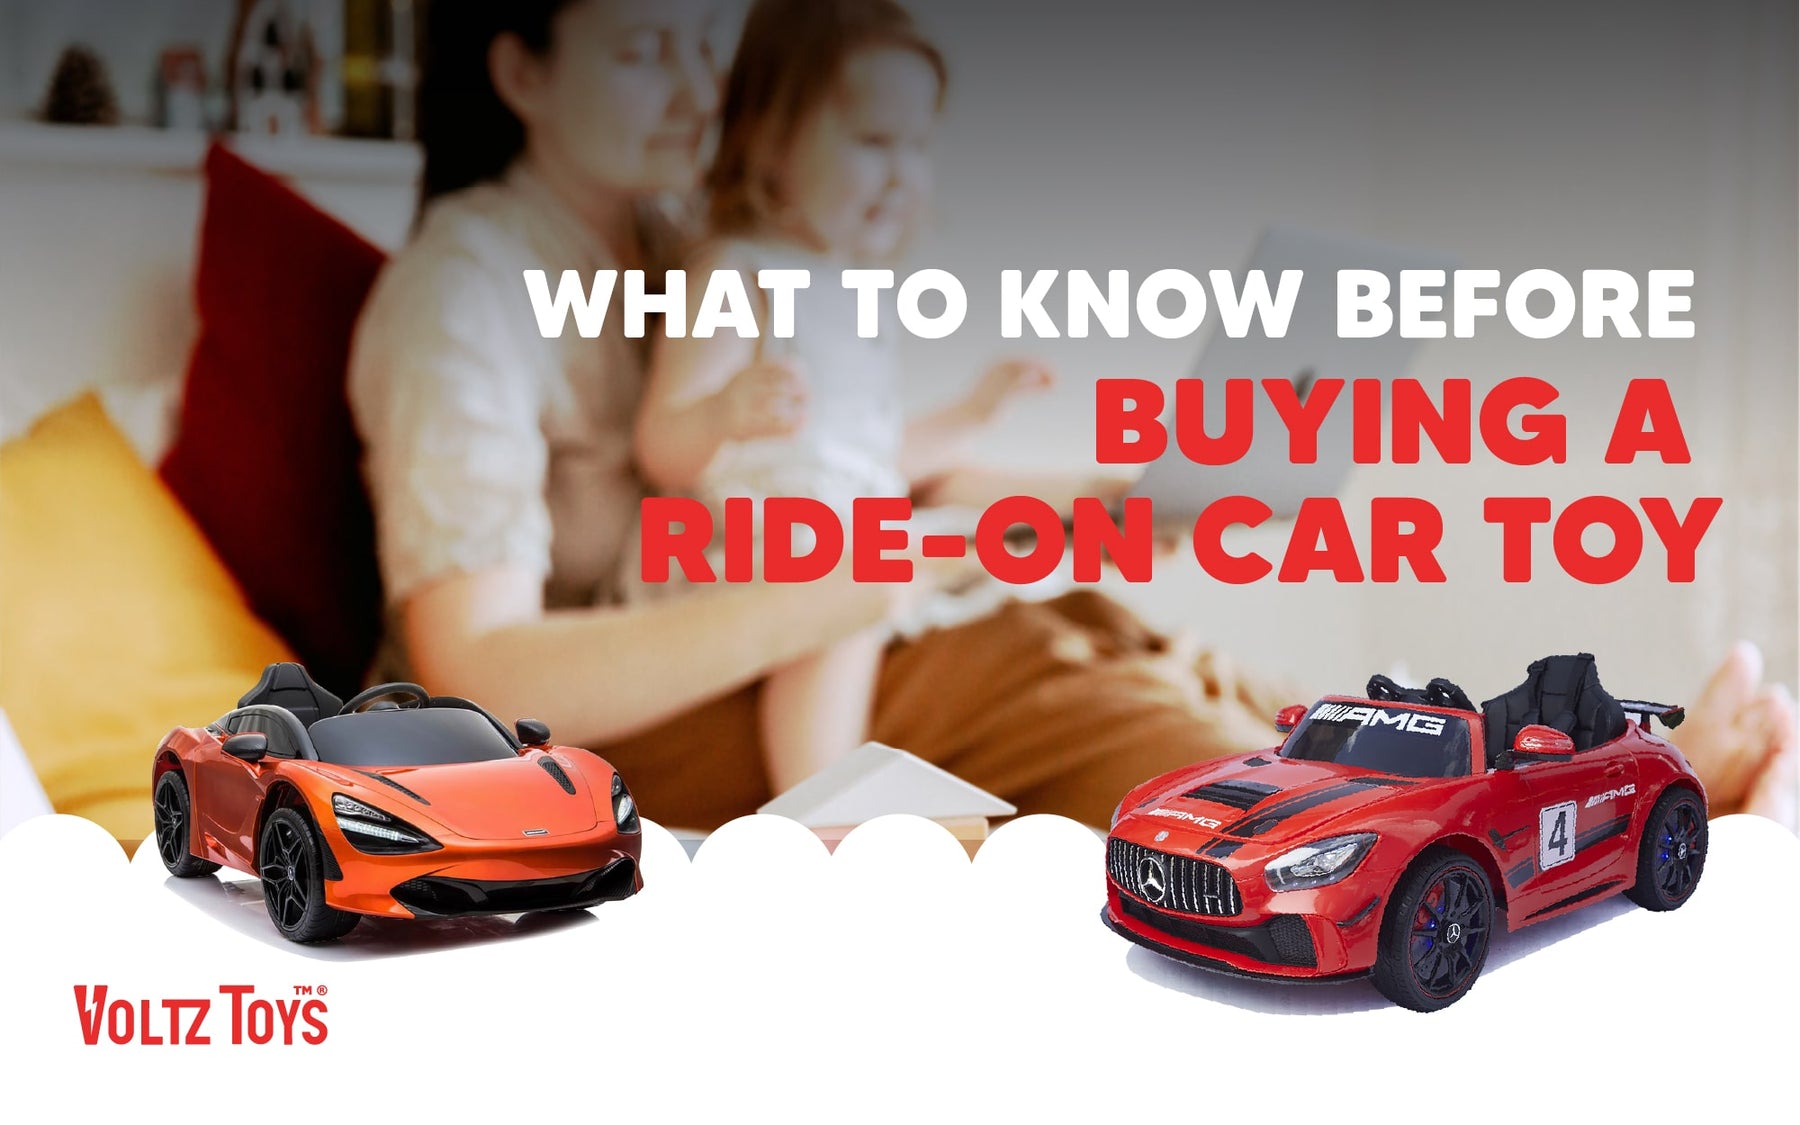 What to Know Before Buying a Ride On Car Toy